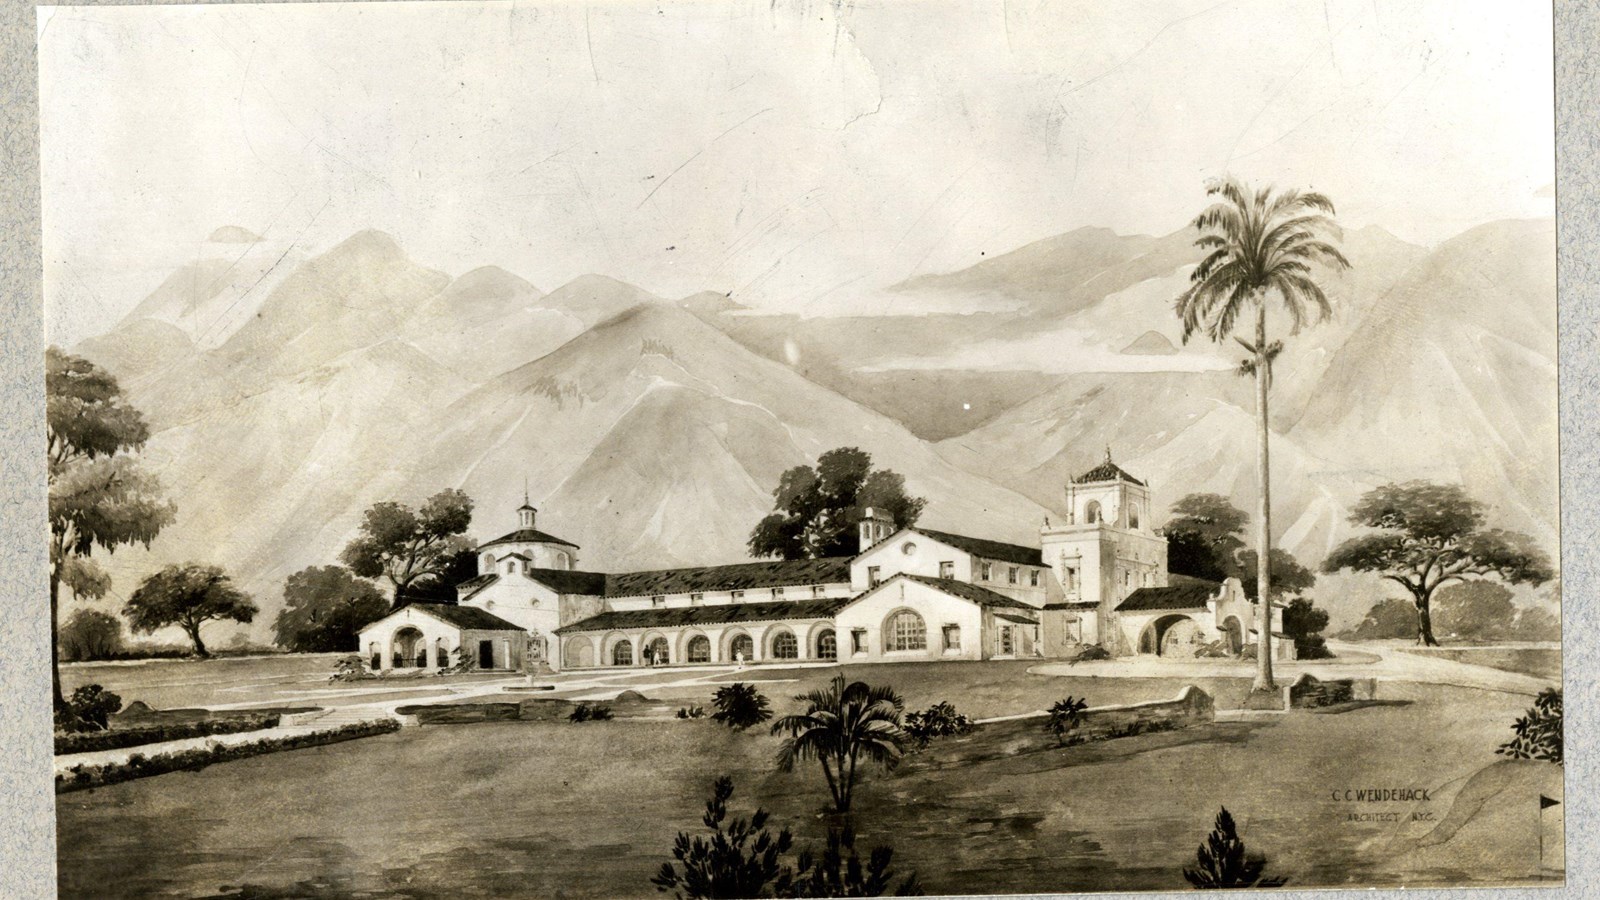 Pencil drawing of large white building with palm trees around and mountains in background.